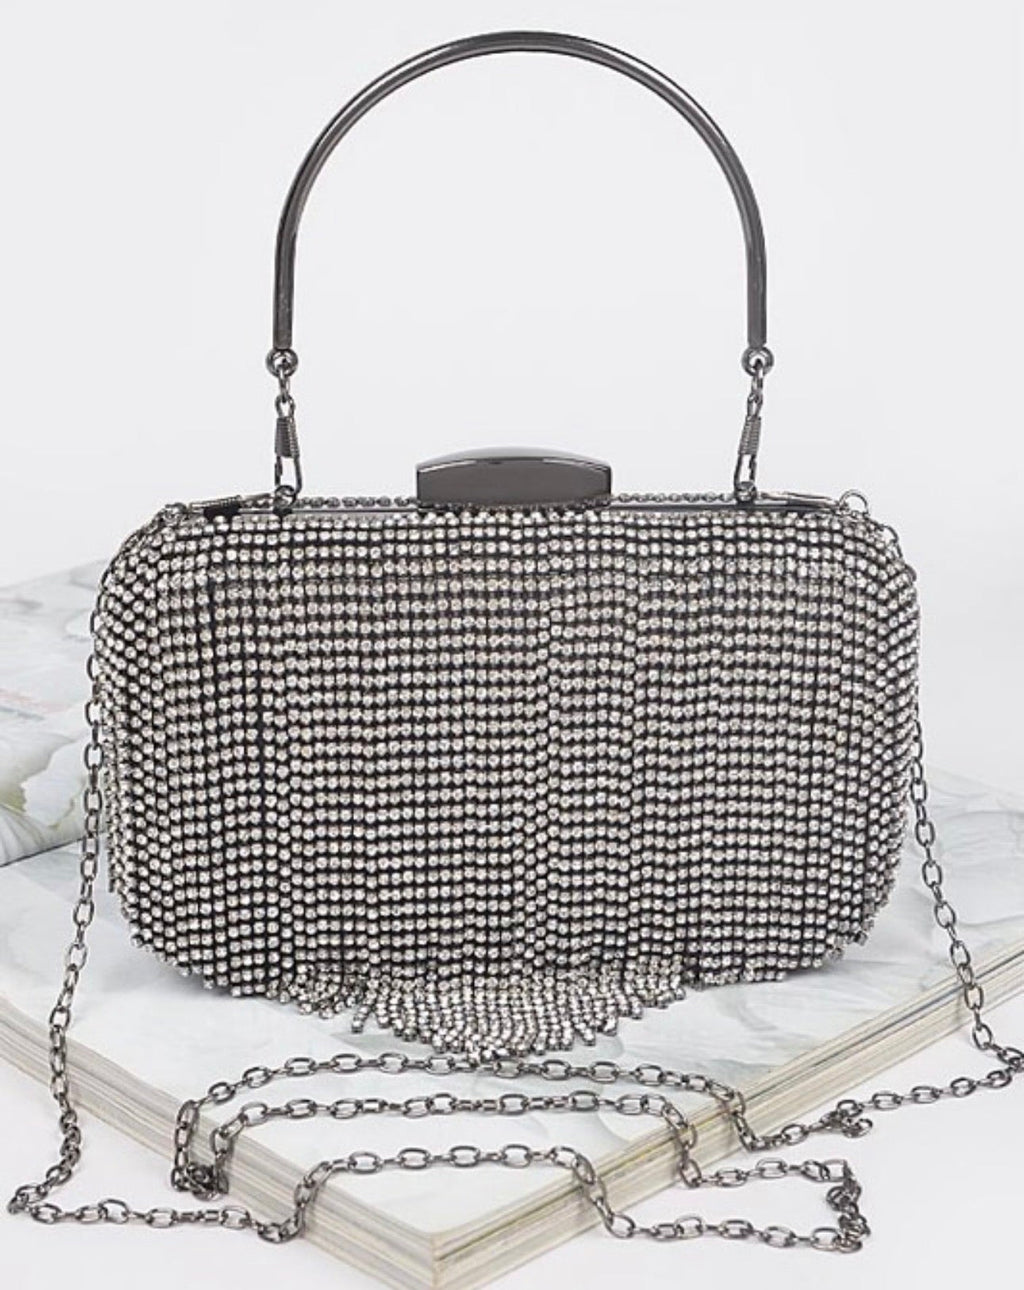 Pearl and Straw Clutch – My-Kim Collection